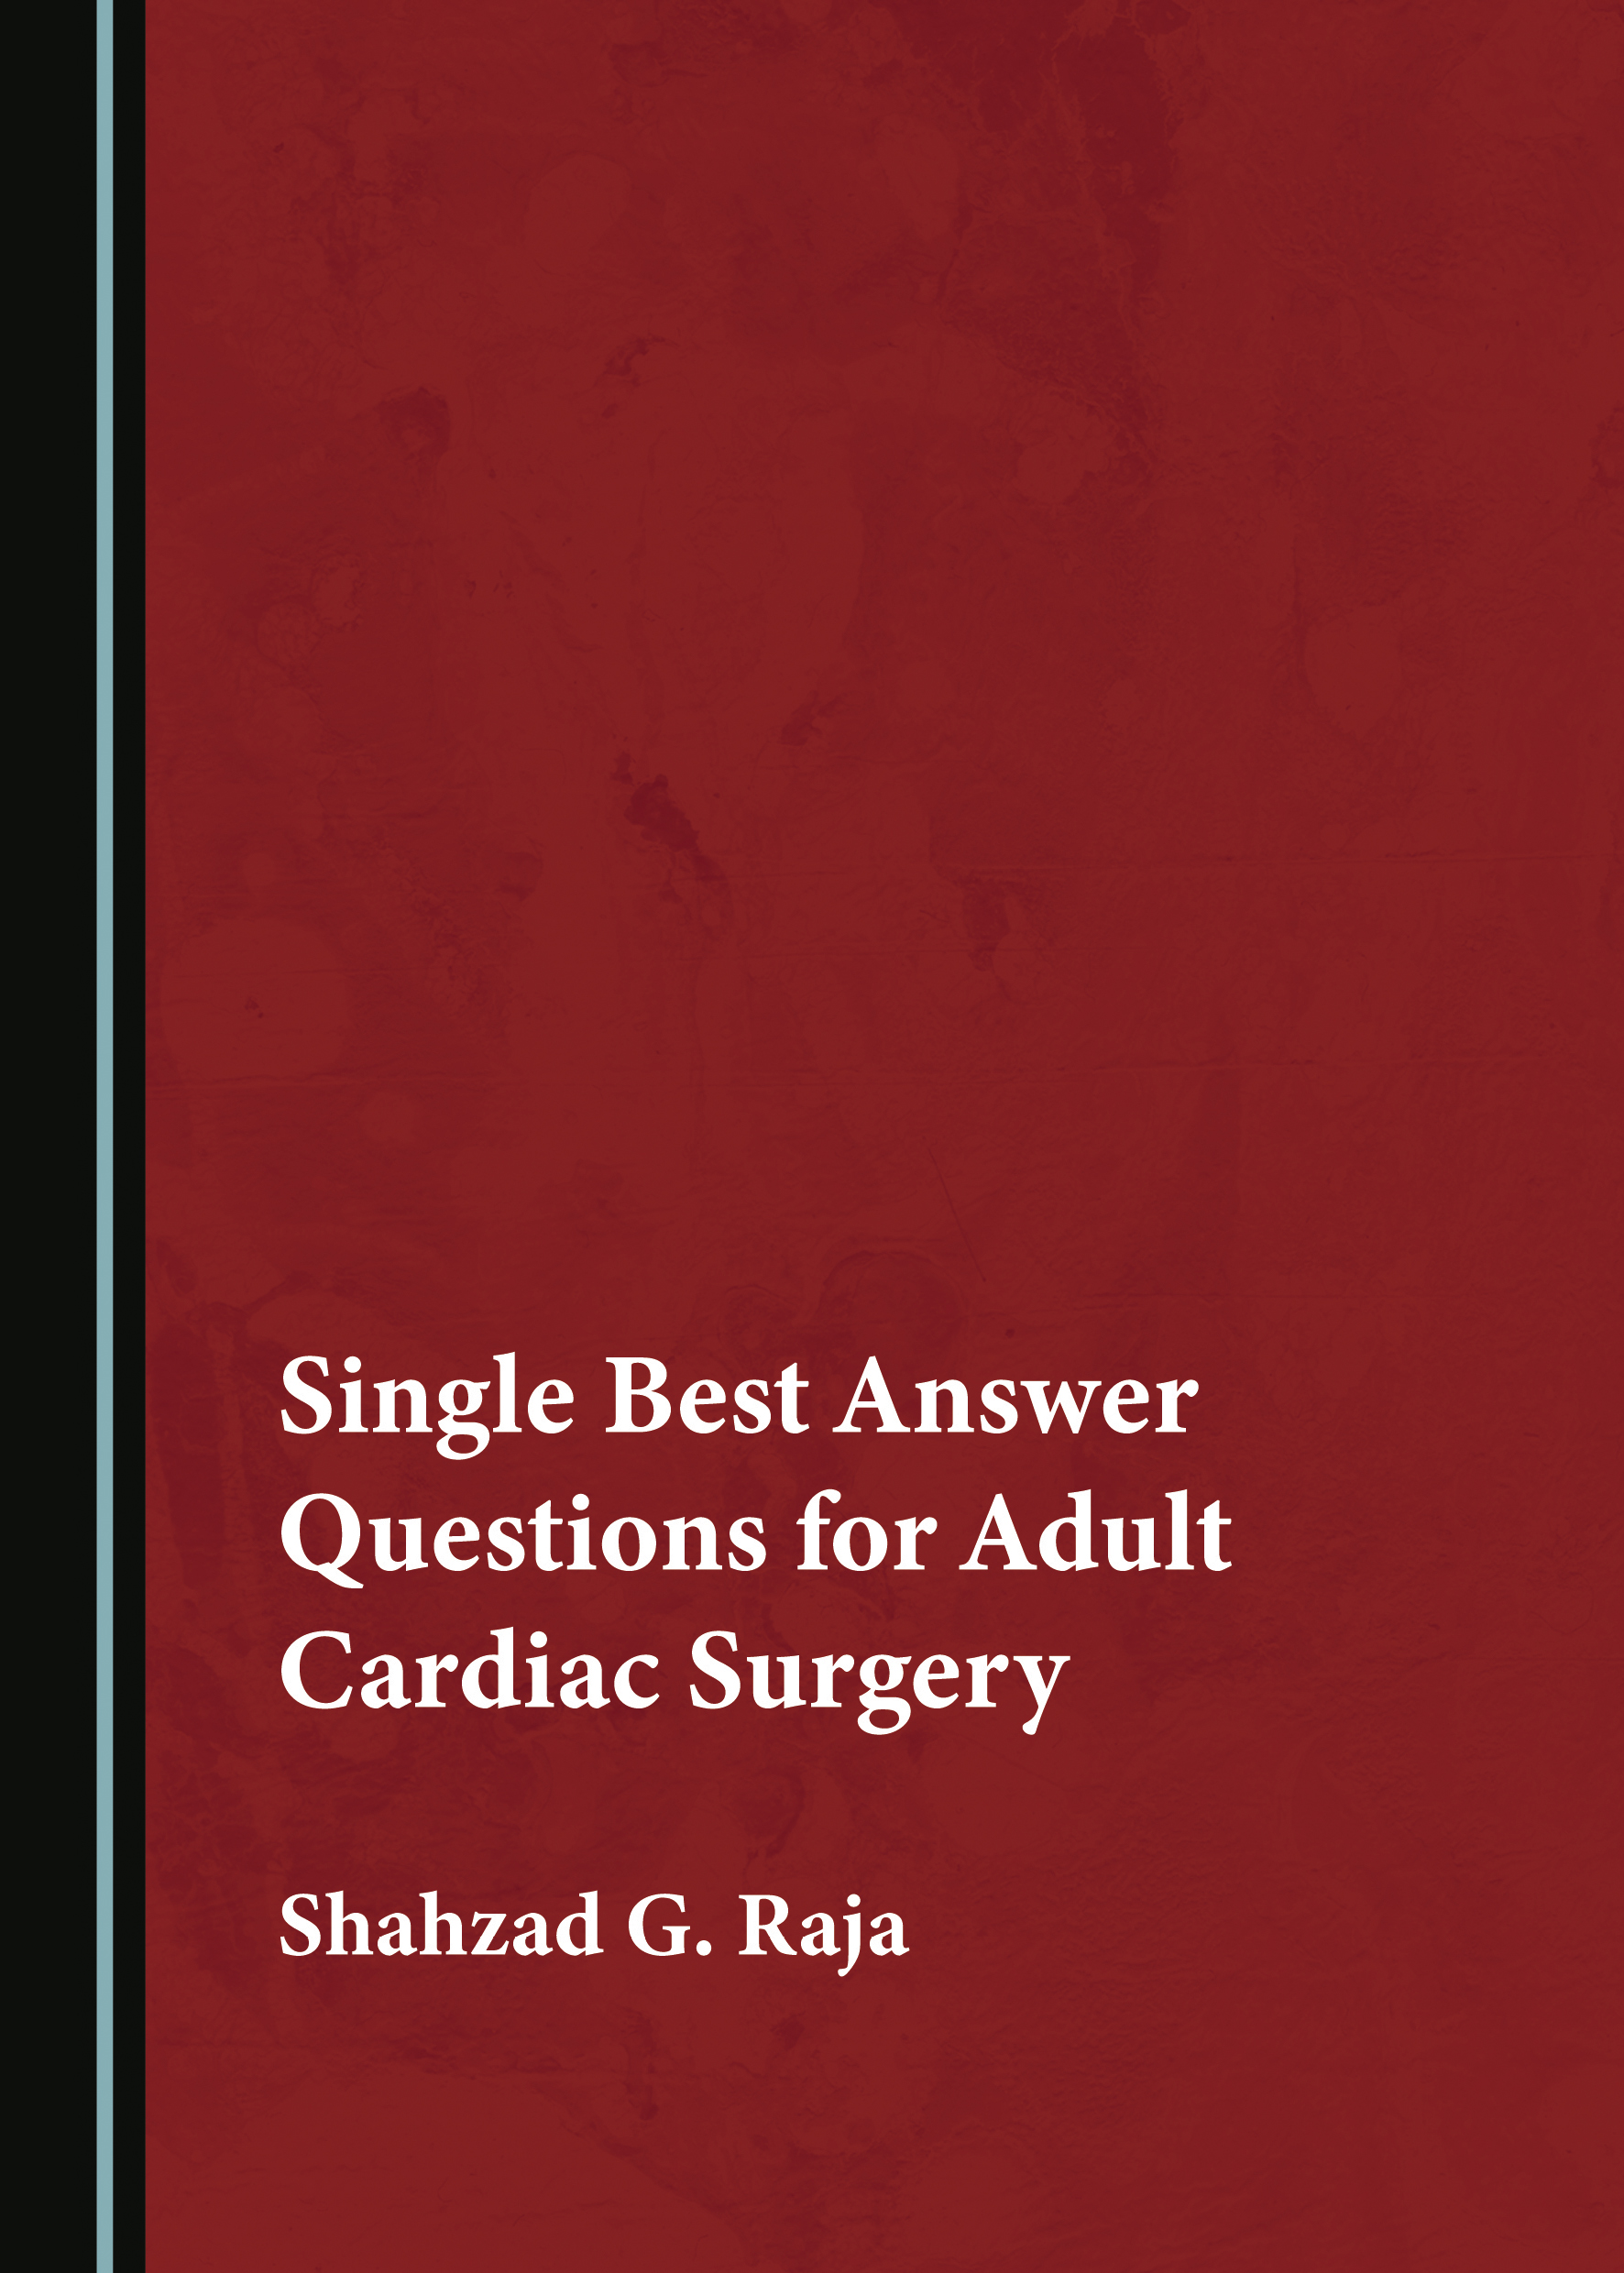 Single Best Answer Questions for Adult Cardiac Surgery